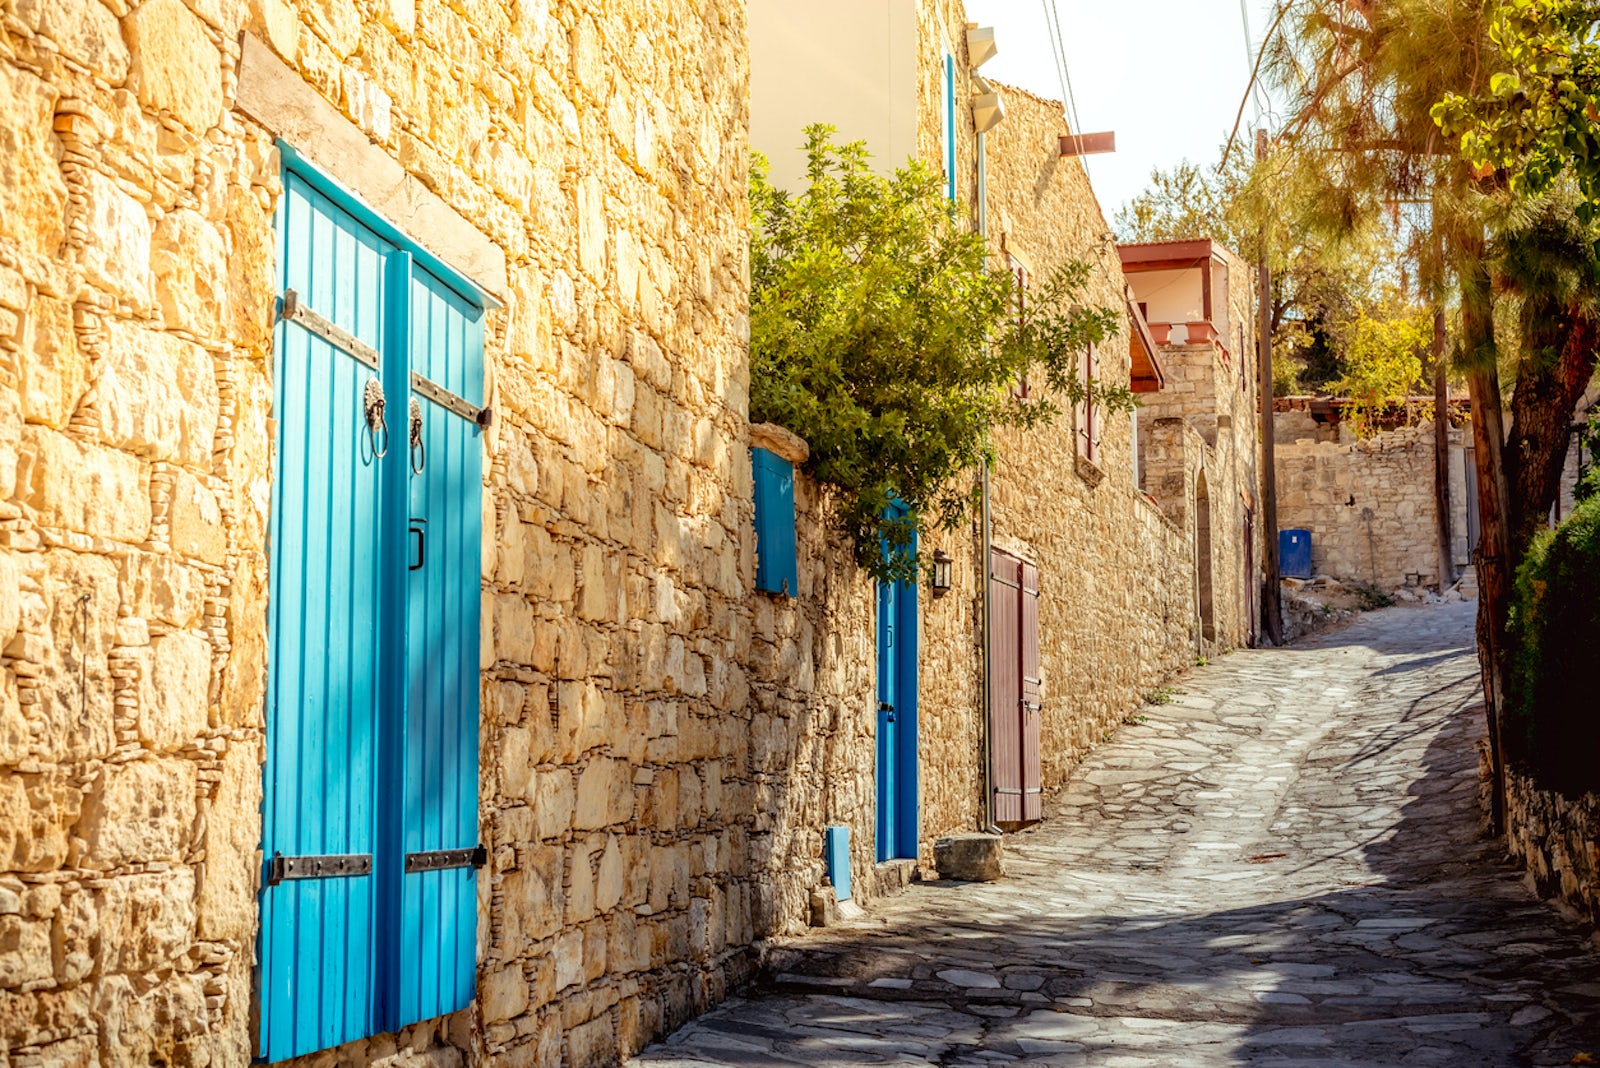 Lofou Village - 15 Best Things to Do in Limassol